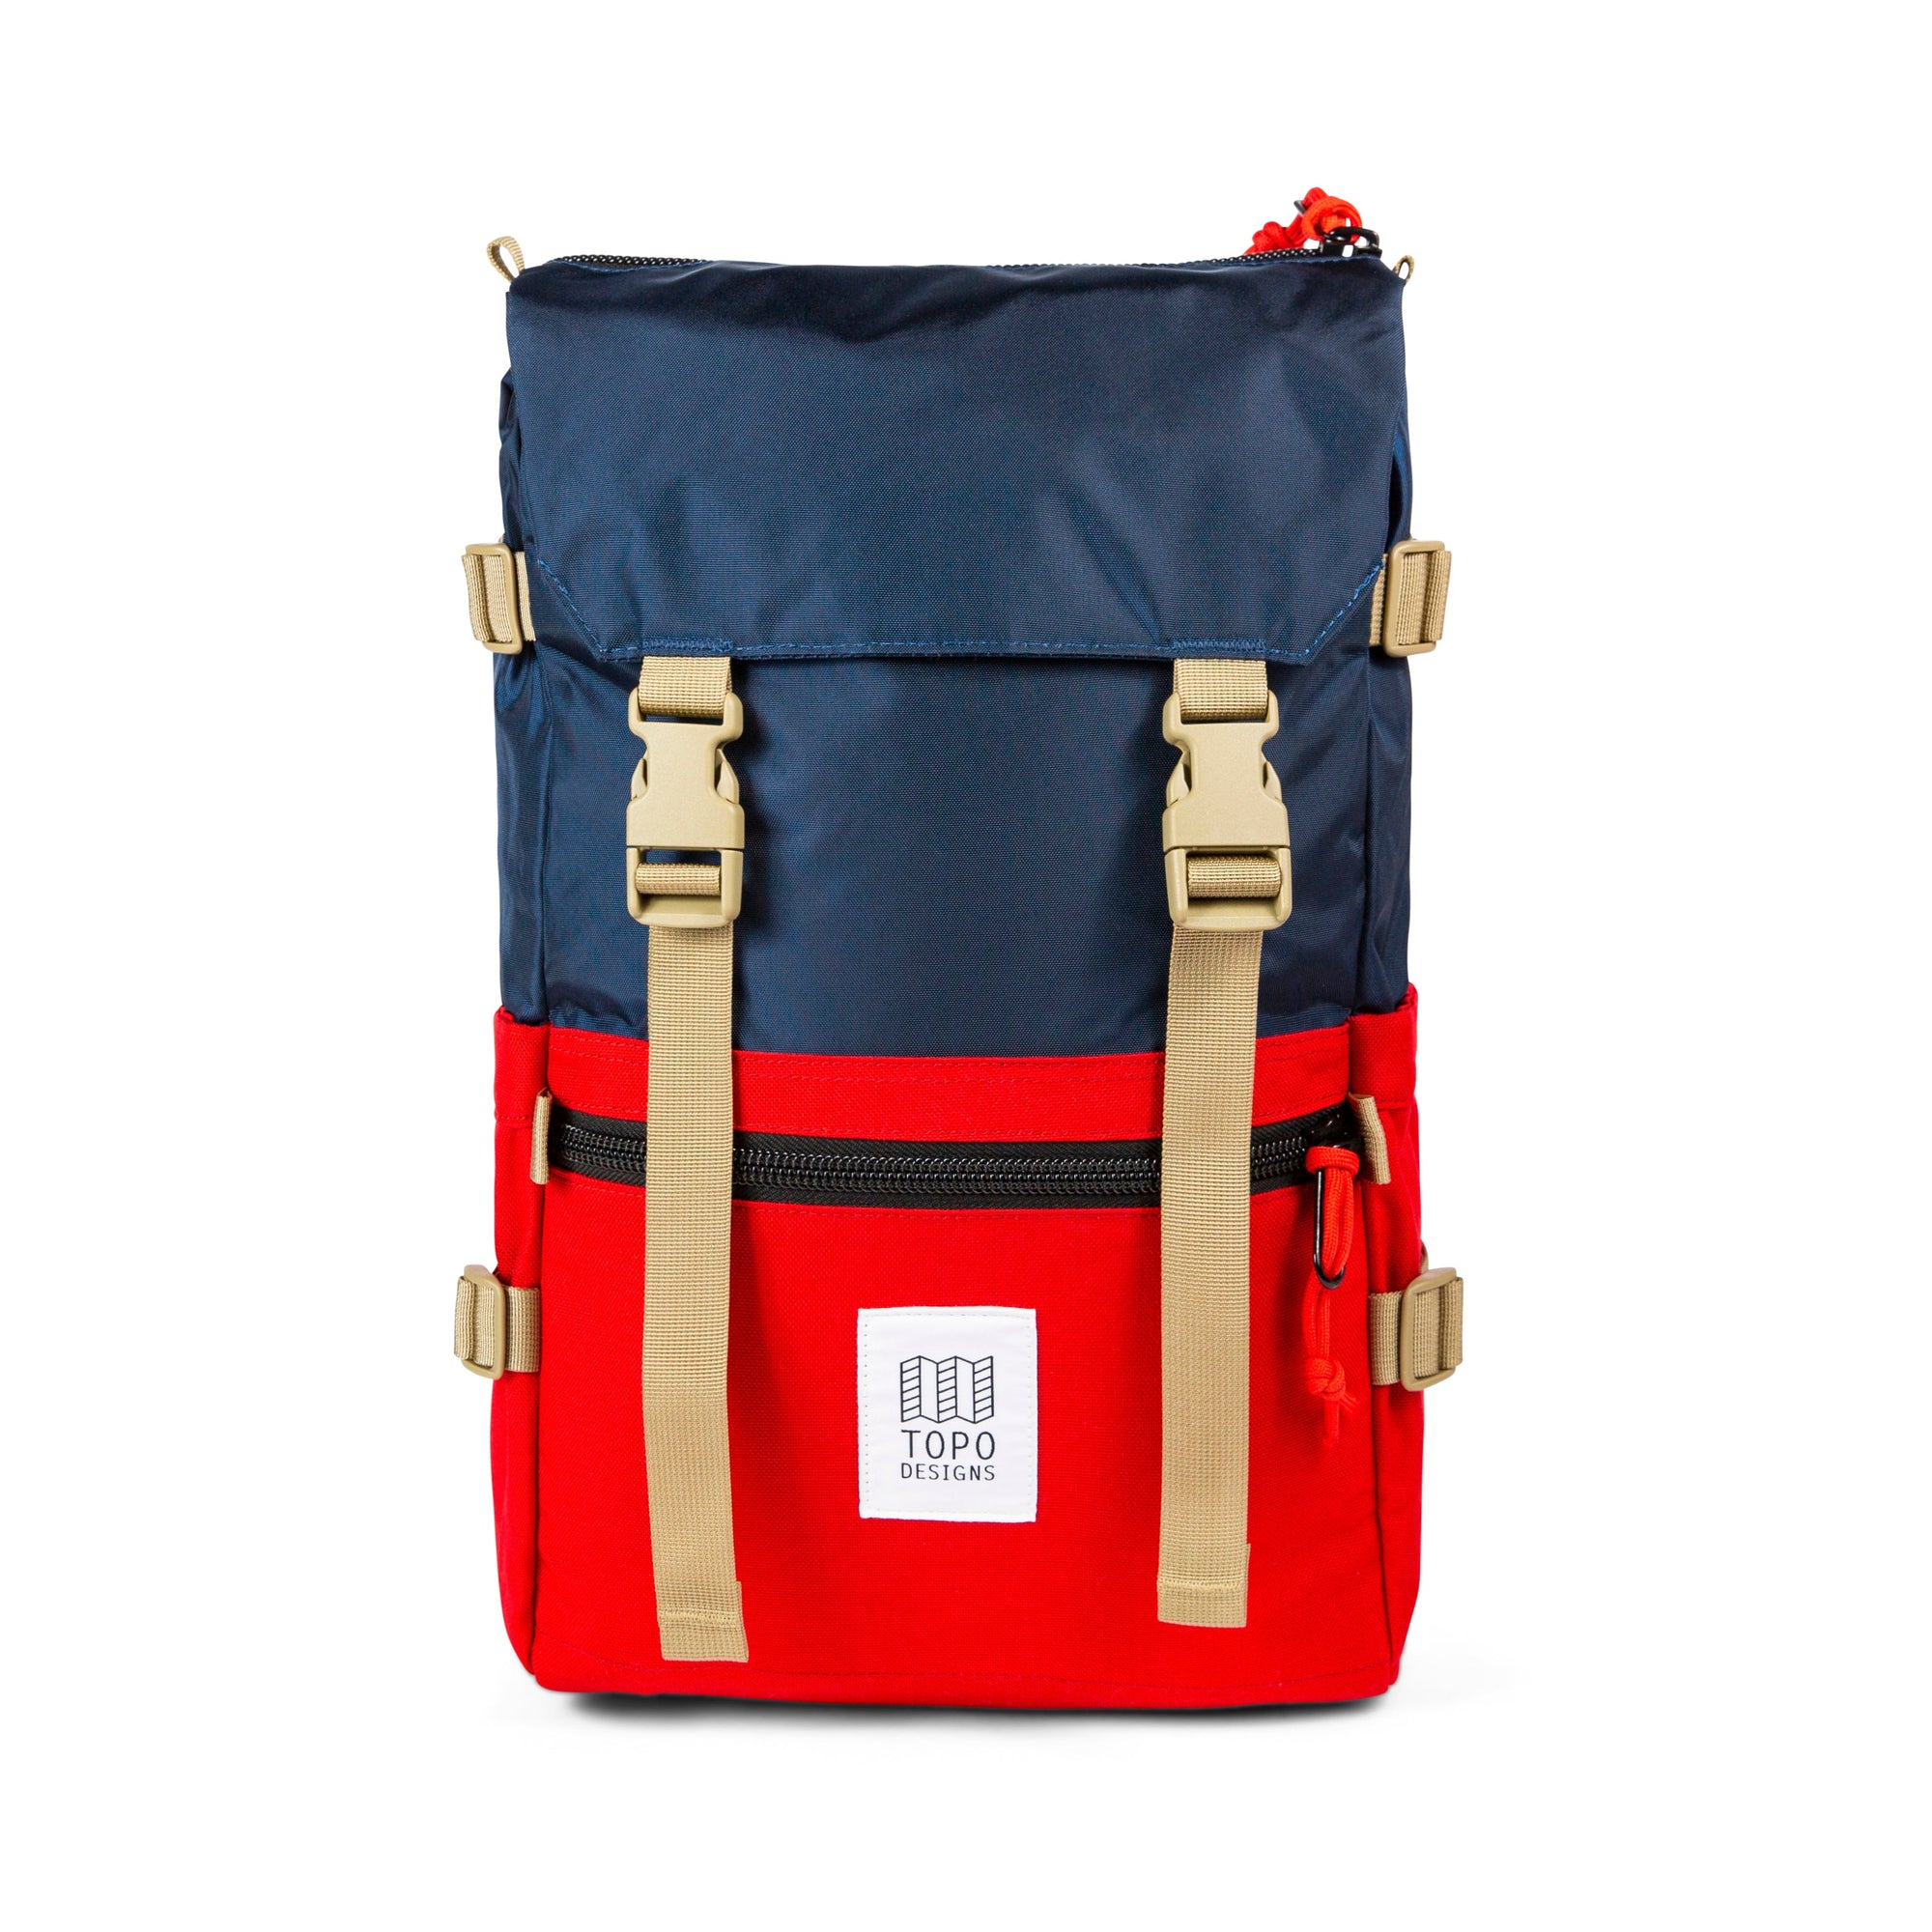 Topo Designs Rover Pack Navy/Red bags Topo Designs 